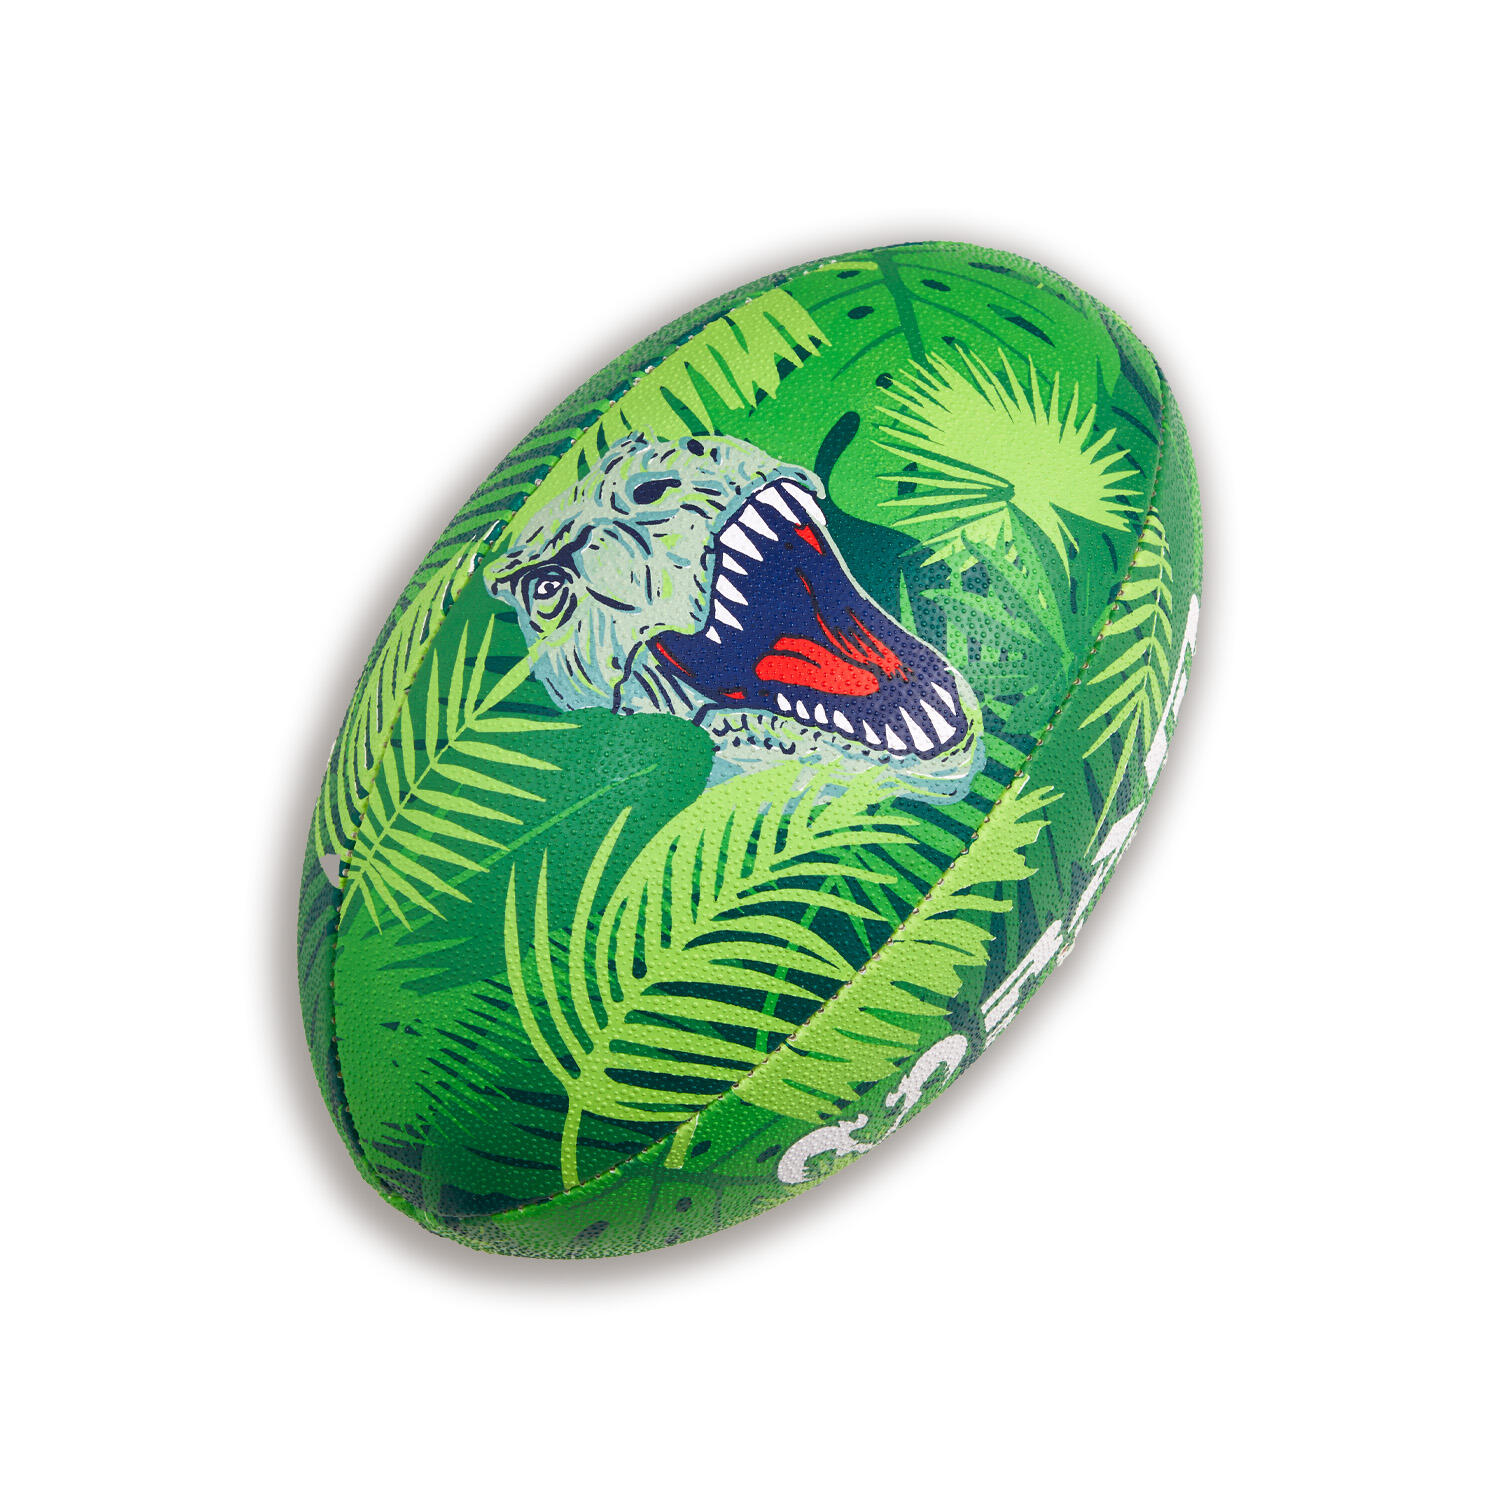 RAM RUGBY Ram Rugby Ball - Squad - Trainer - (Size 3) - Ramosaurus Rex